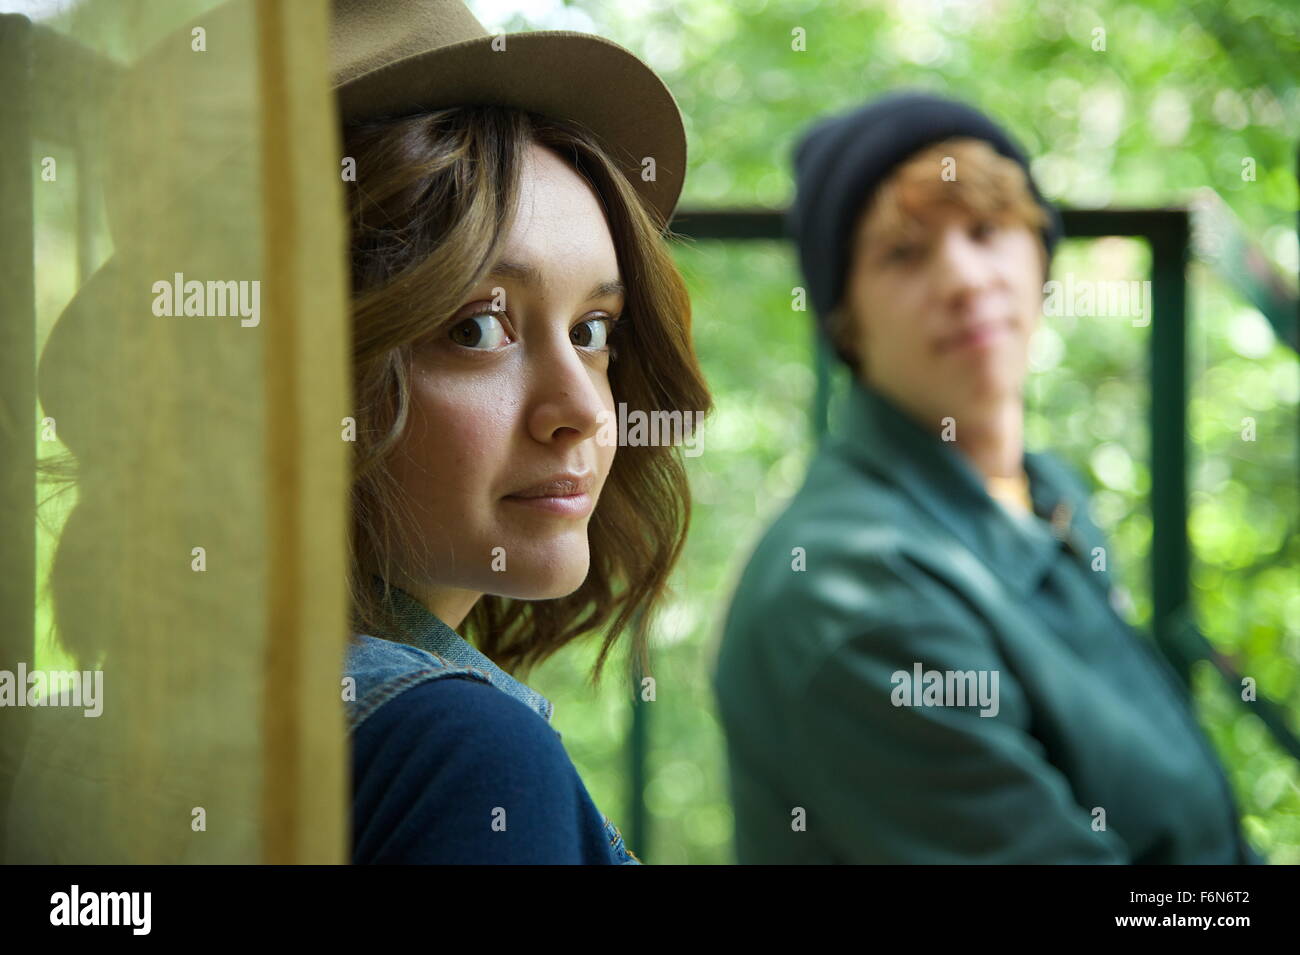 RELEASE DATE: June 12, 2015 TITLE: Me and Earl and The Dying Girl STUDIO: Fox Searchlight Pictures DIRECTOR: Alfonso Gomez-Rejon PLOT: High schooler Greg, who spends most of his time making parodies of classic movies with his co-worker Earl, finds his outlook forever altered after befriending a classmate who has just been diagnosed with cancer PICTURED: OLIVIA COOKE as Rachel, THOMAS MANN as Greg (Credit: c Fox Searchlight Pictures/Entertainment Pictures) Stock Photo